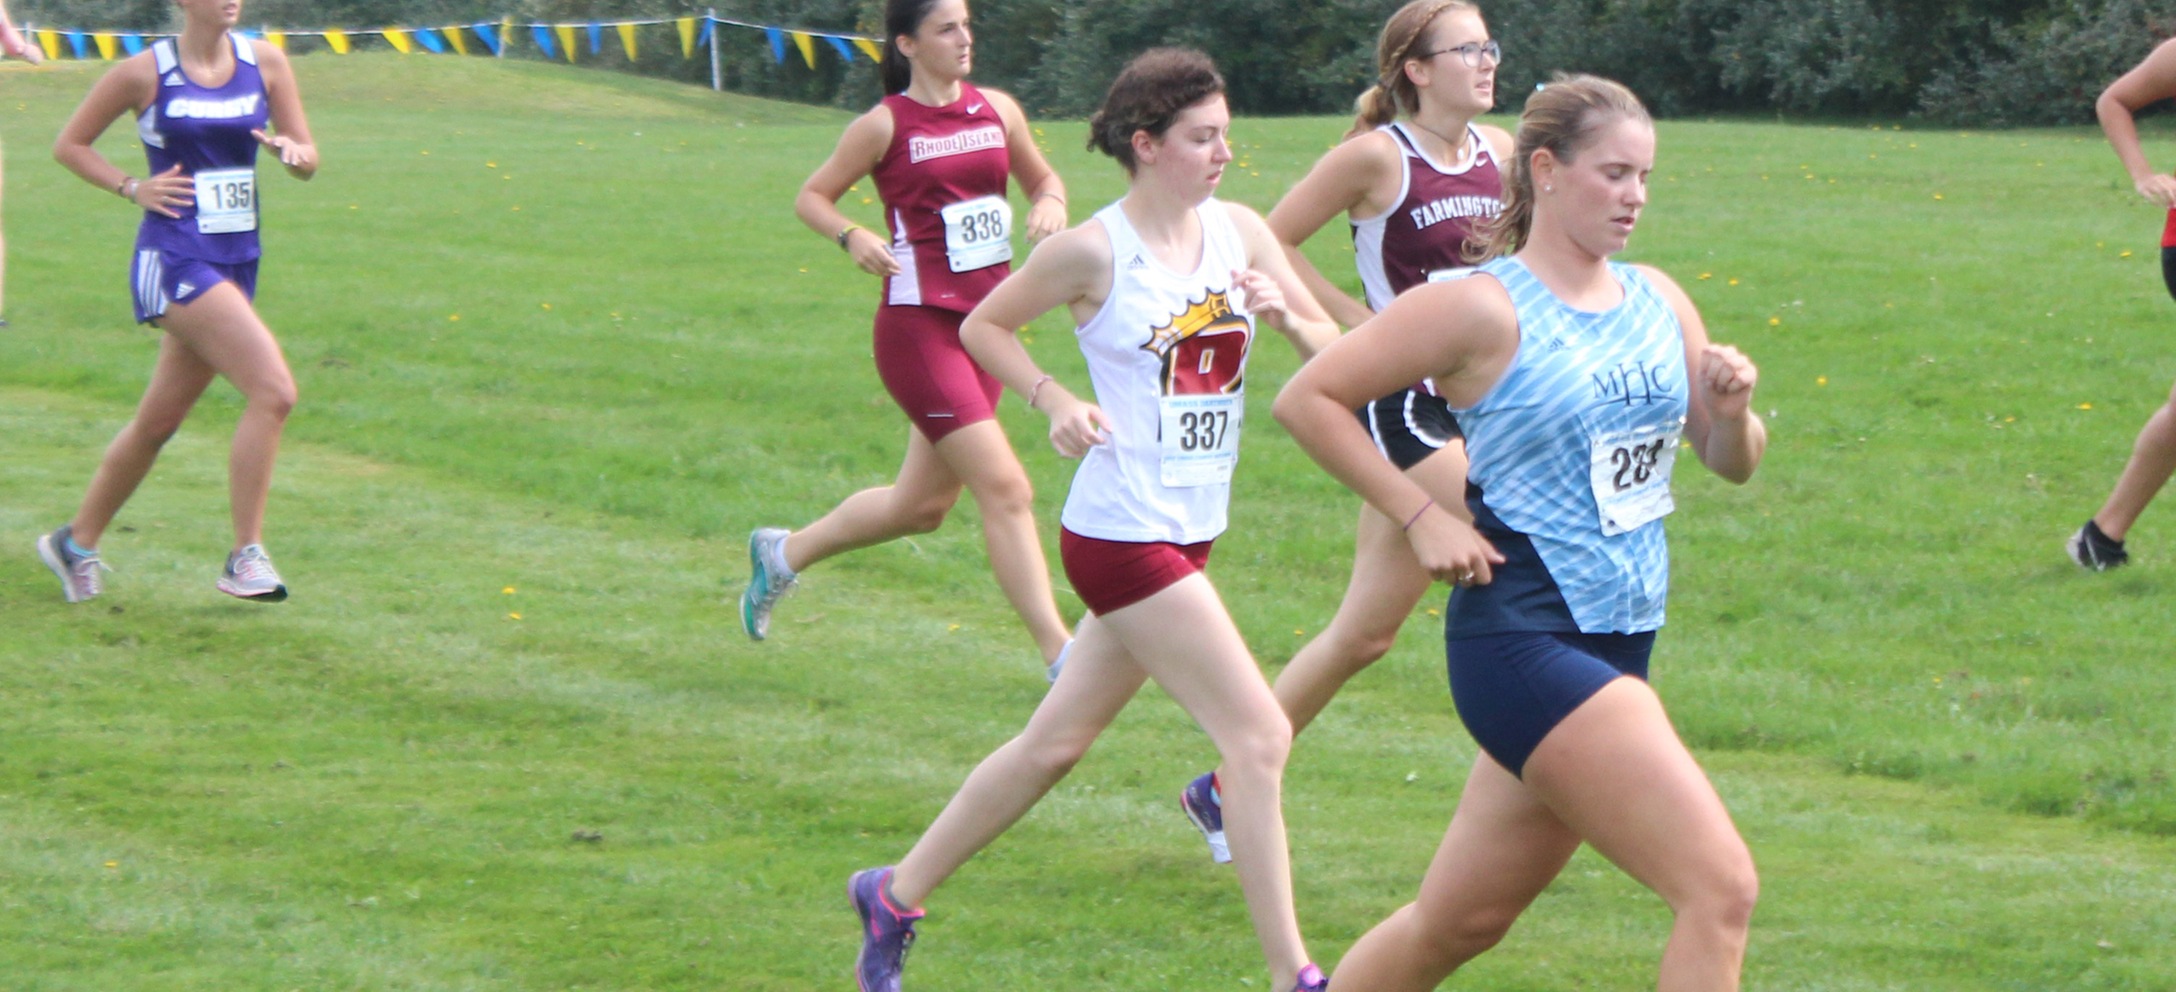 Cross Country Competes At James Earley Invitational